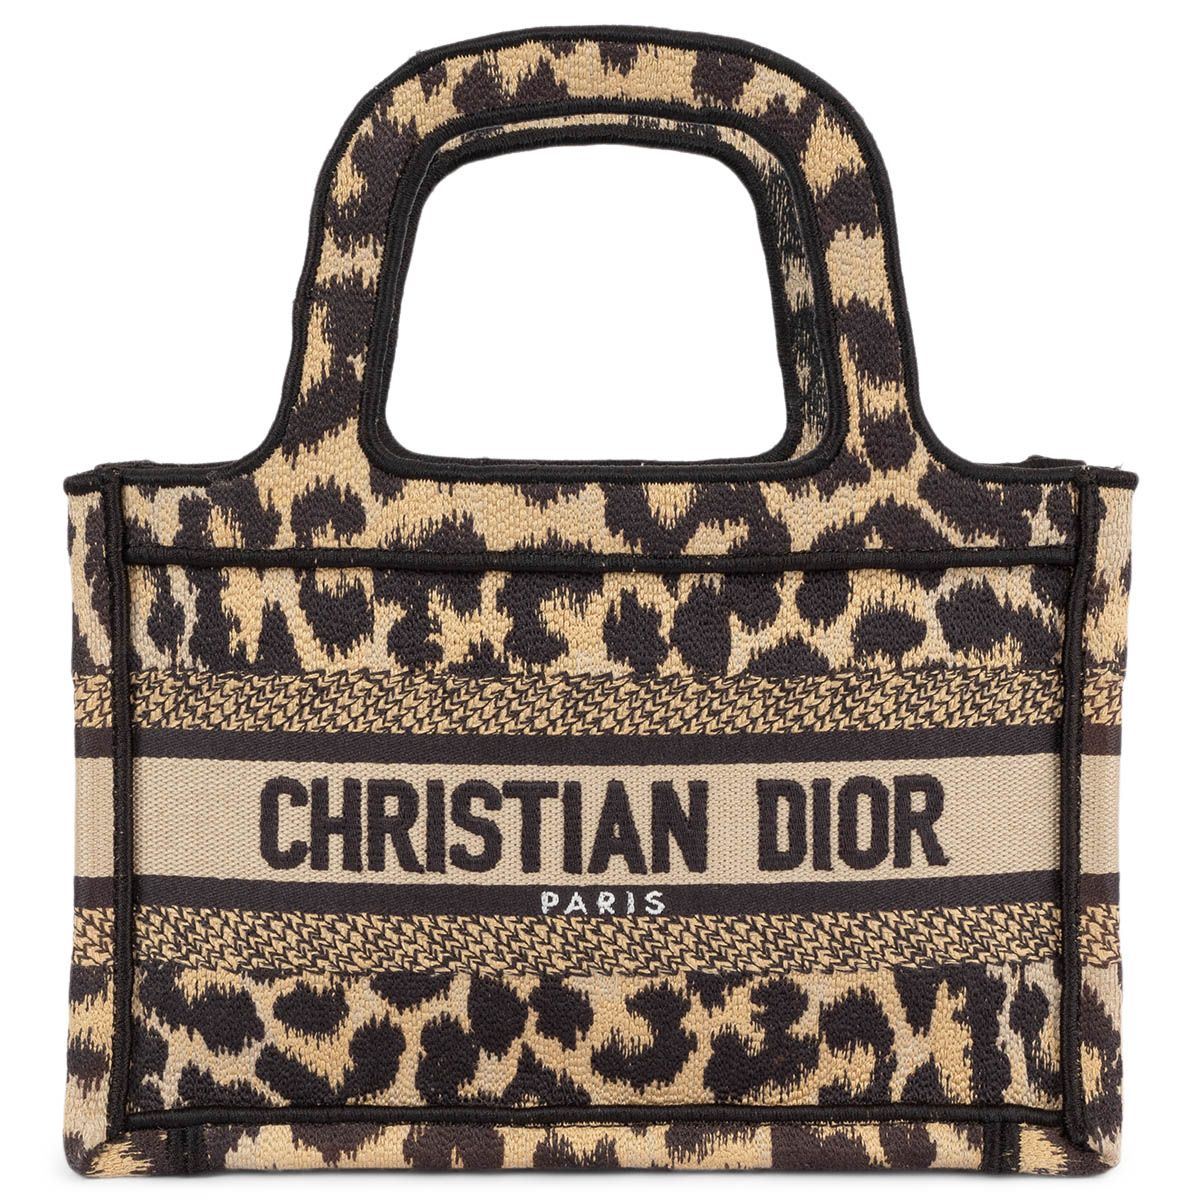 CHRISTIAN DIOR BOOK TOTE LIMITED EDITION, EMBROIDERED CANVAS BAG, NEW